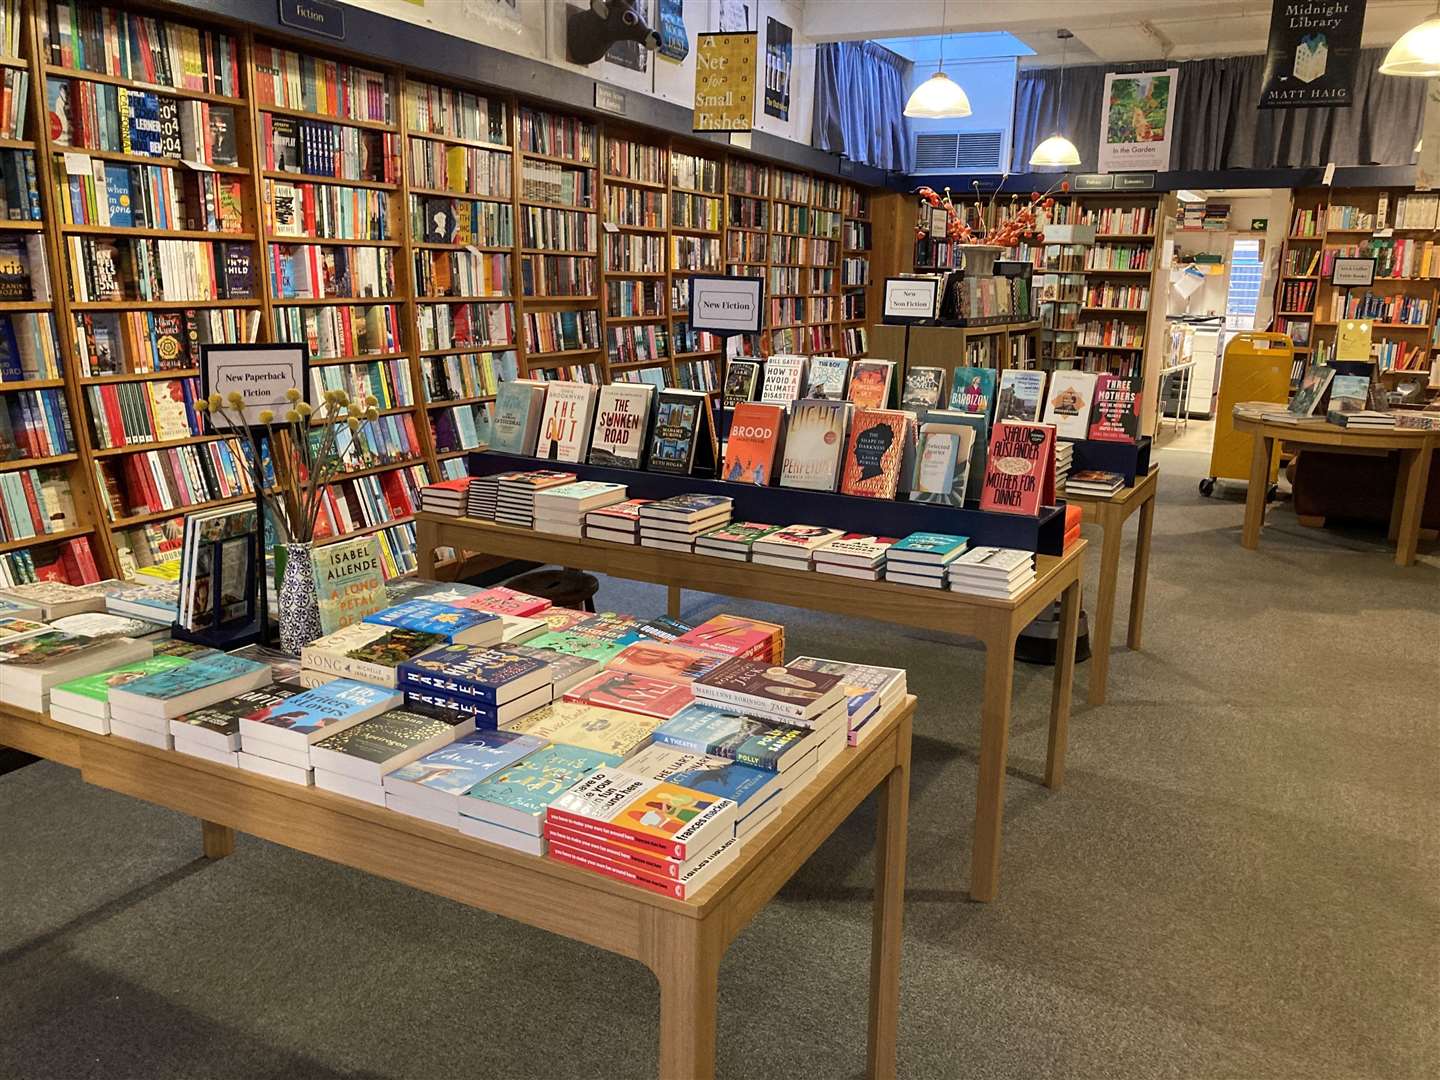 Sevenoaks Bookshop is one of the county's top independent bookshops and the official retailer for the Sevenoaks Literary Festival. Picture: Sevenoaks Bookshop